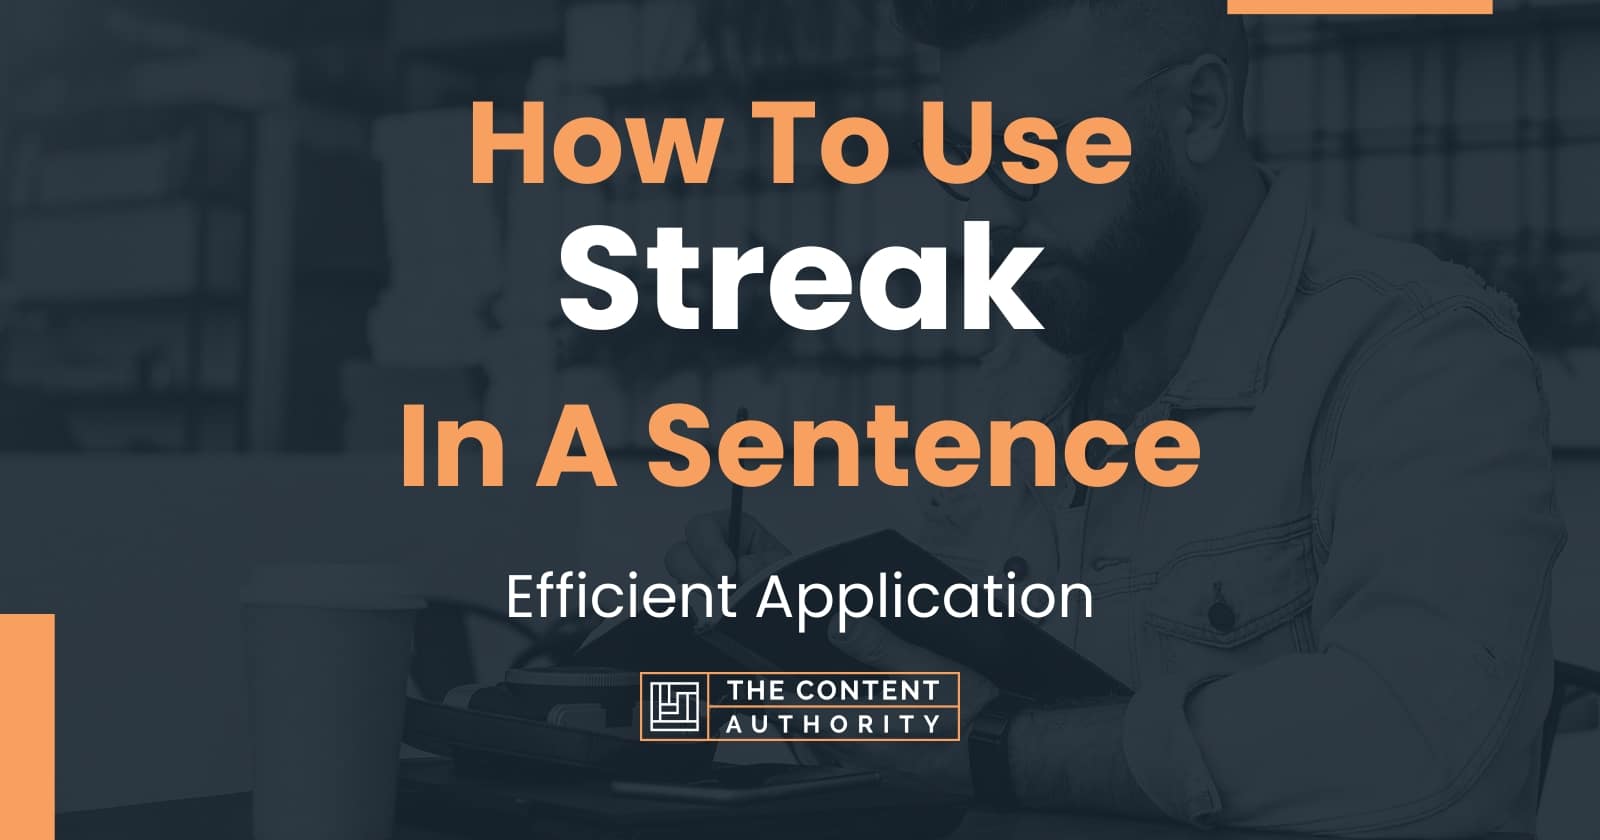 how-to-use-streak-in-a-sentence-efficient-application